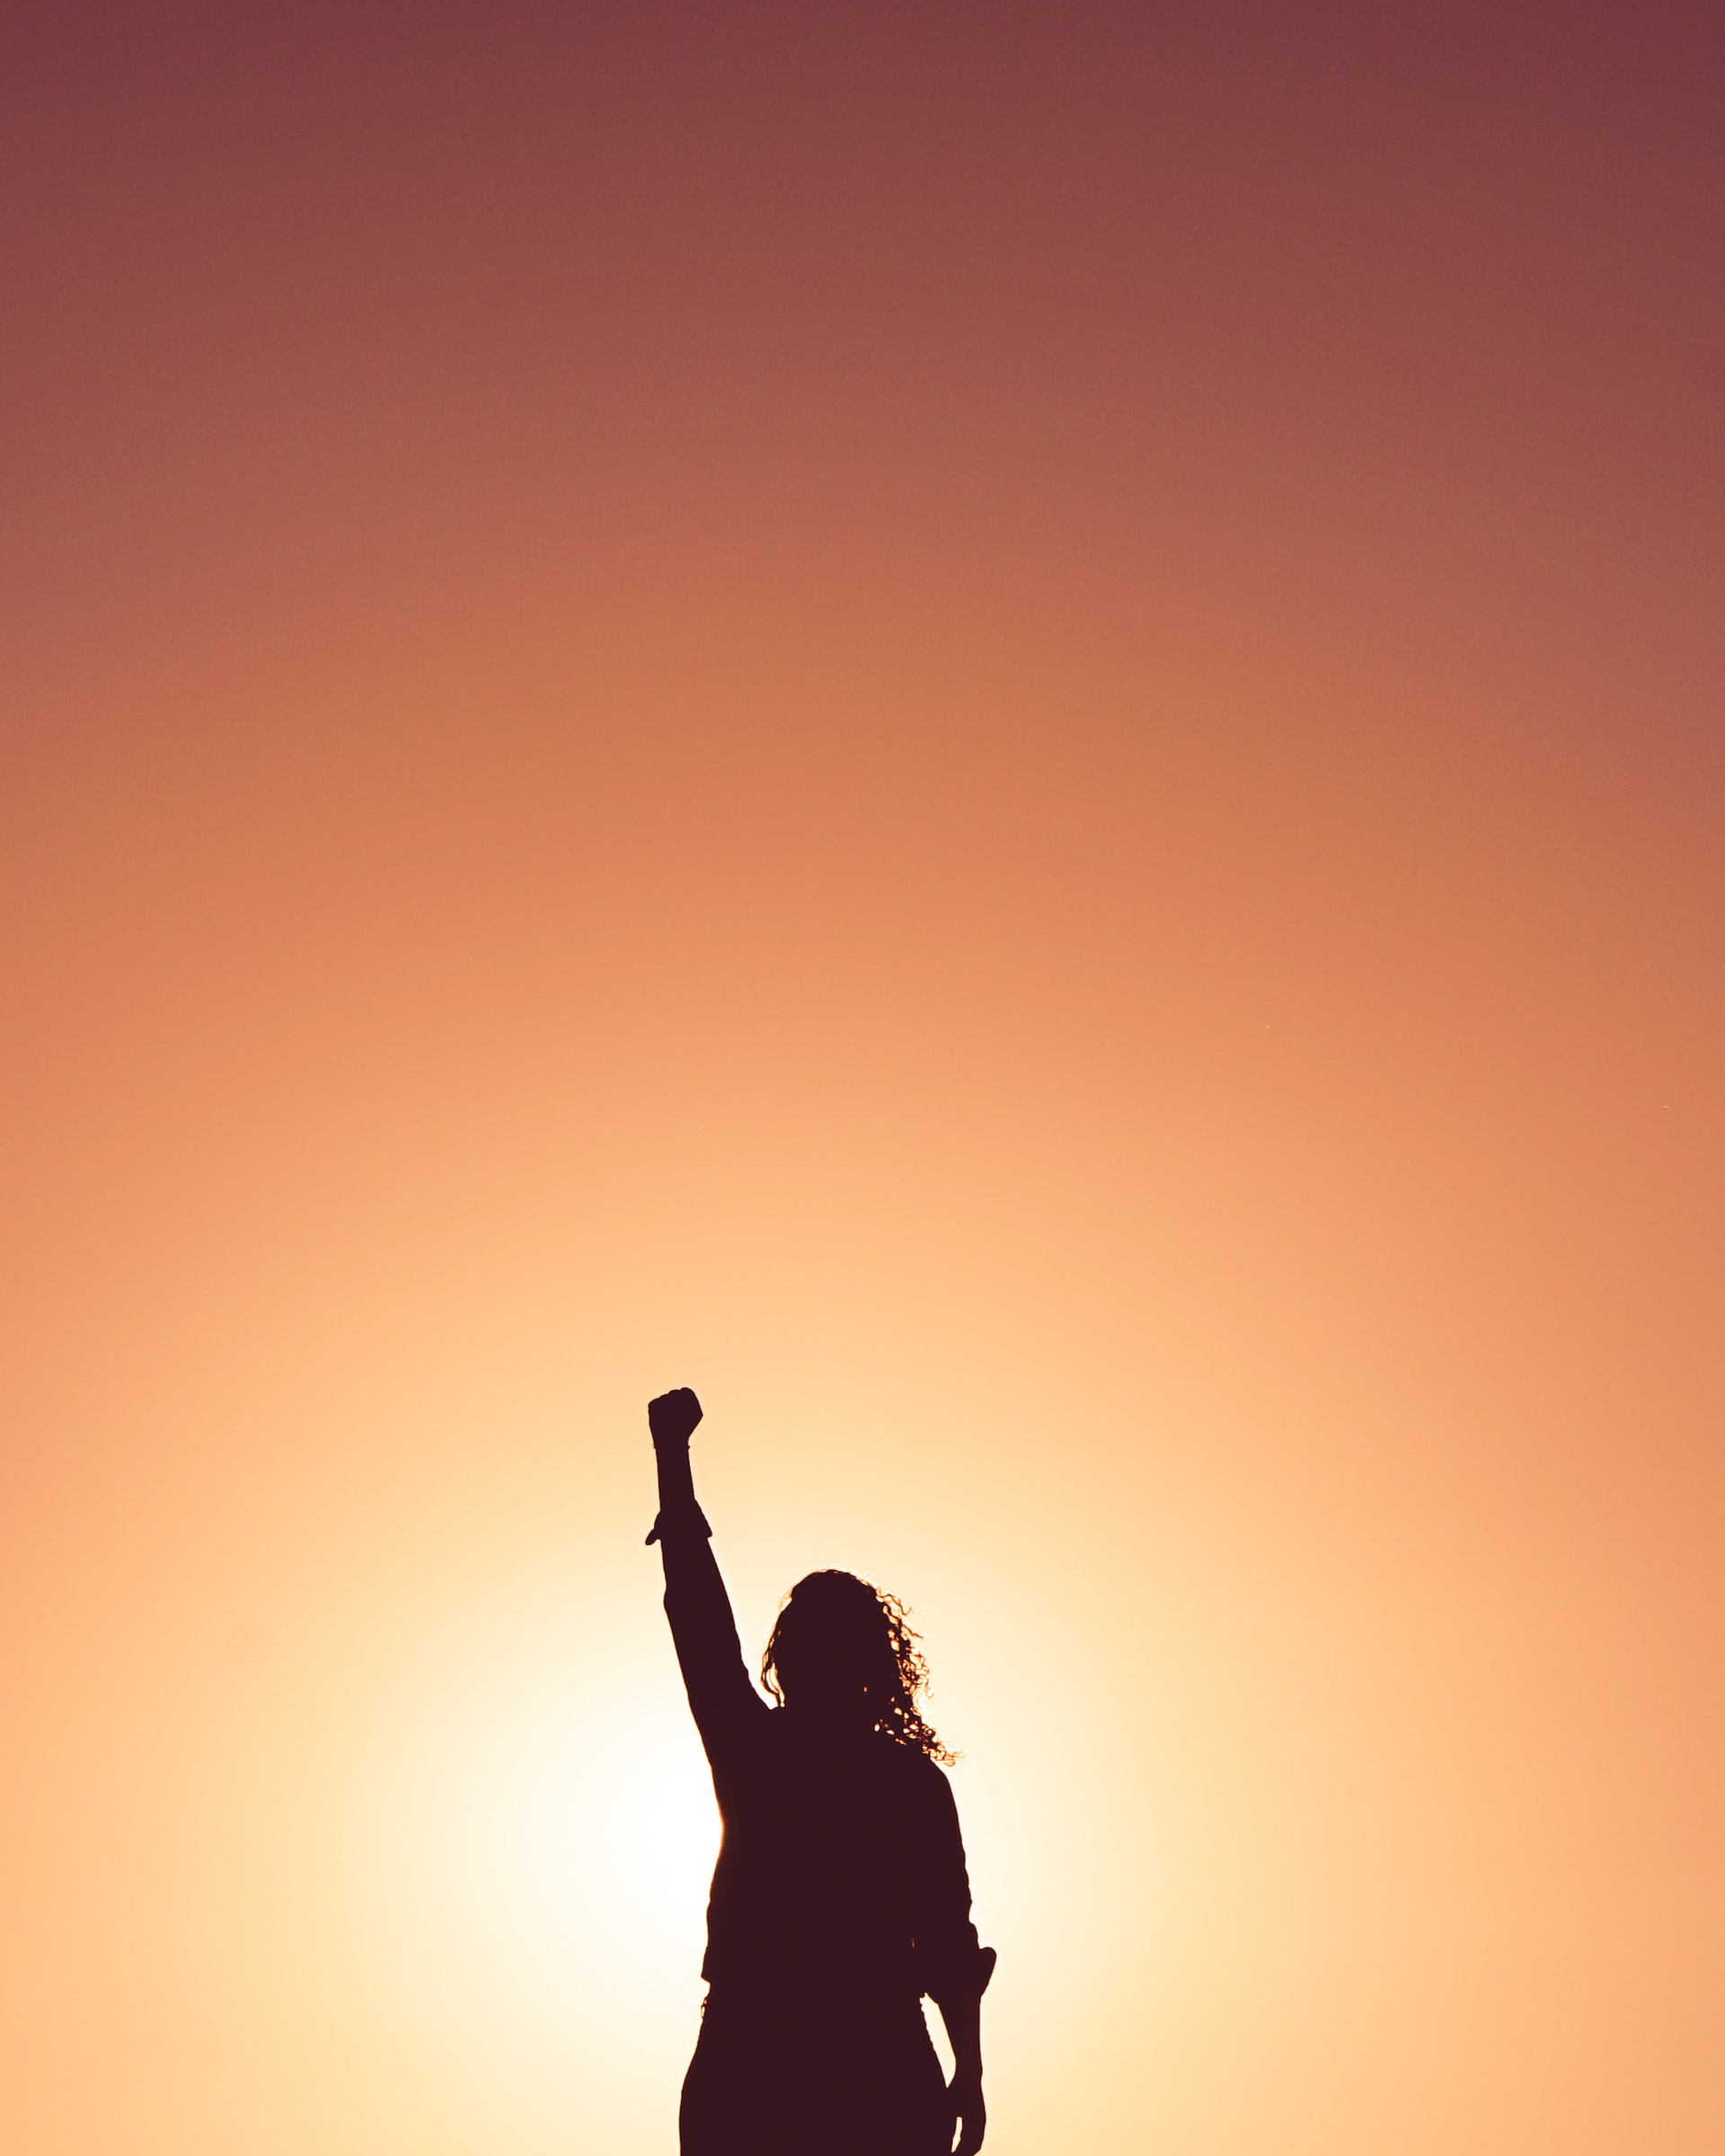 image of woman standing against orange background with one hand in the air